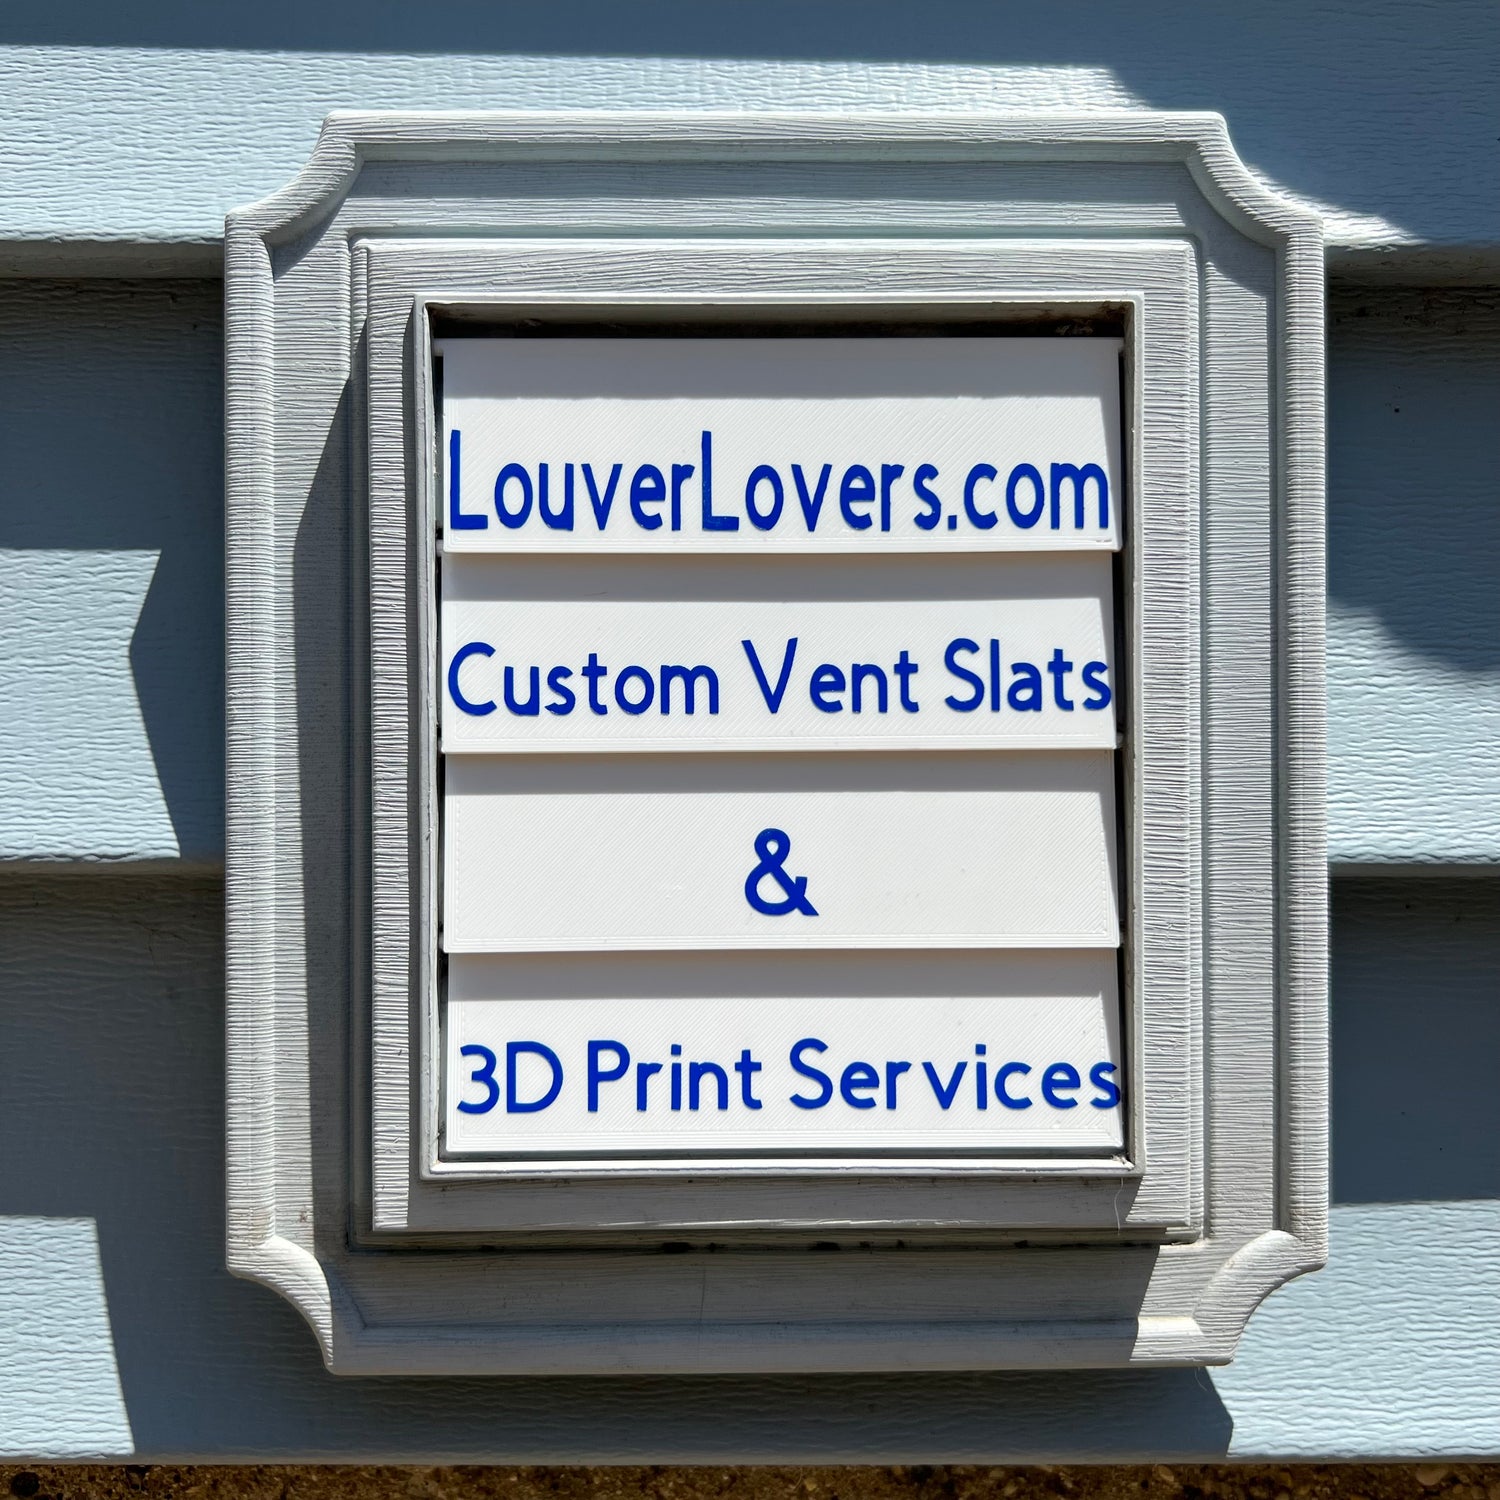 Louver Lovers and 3D printing services